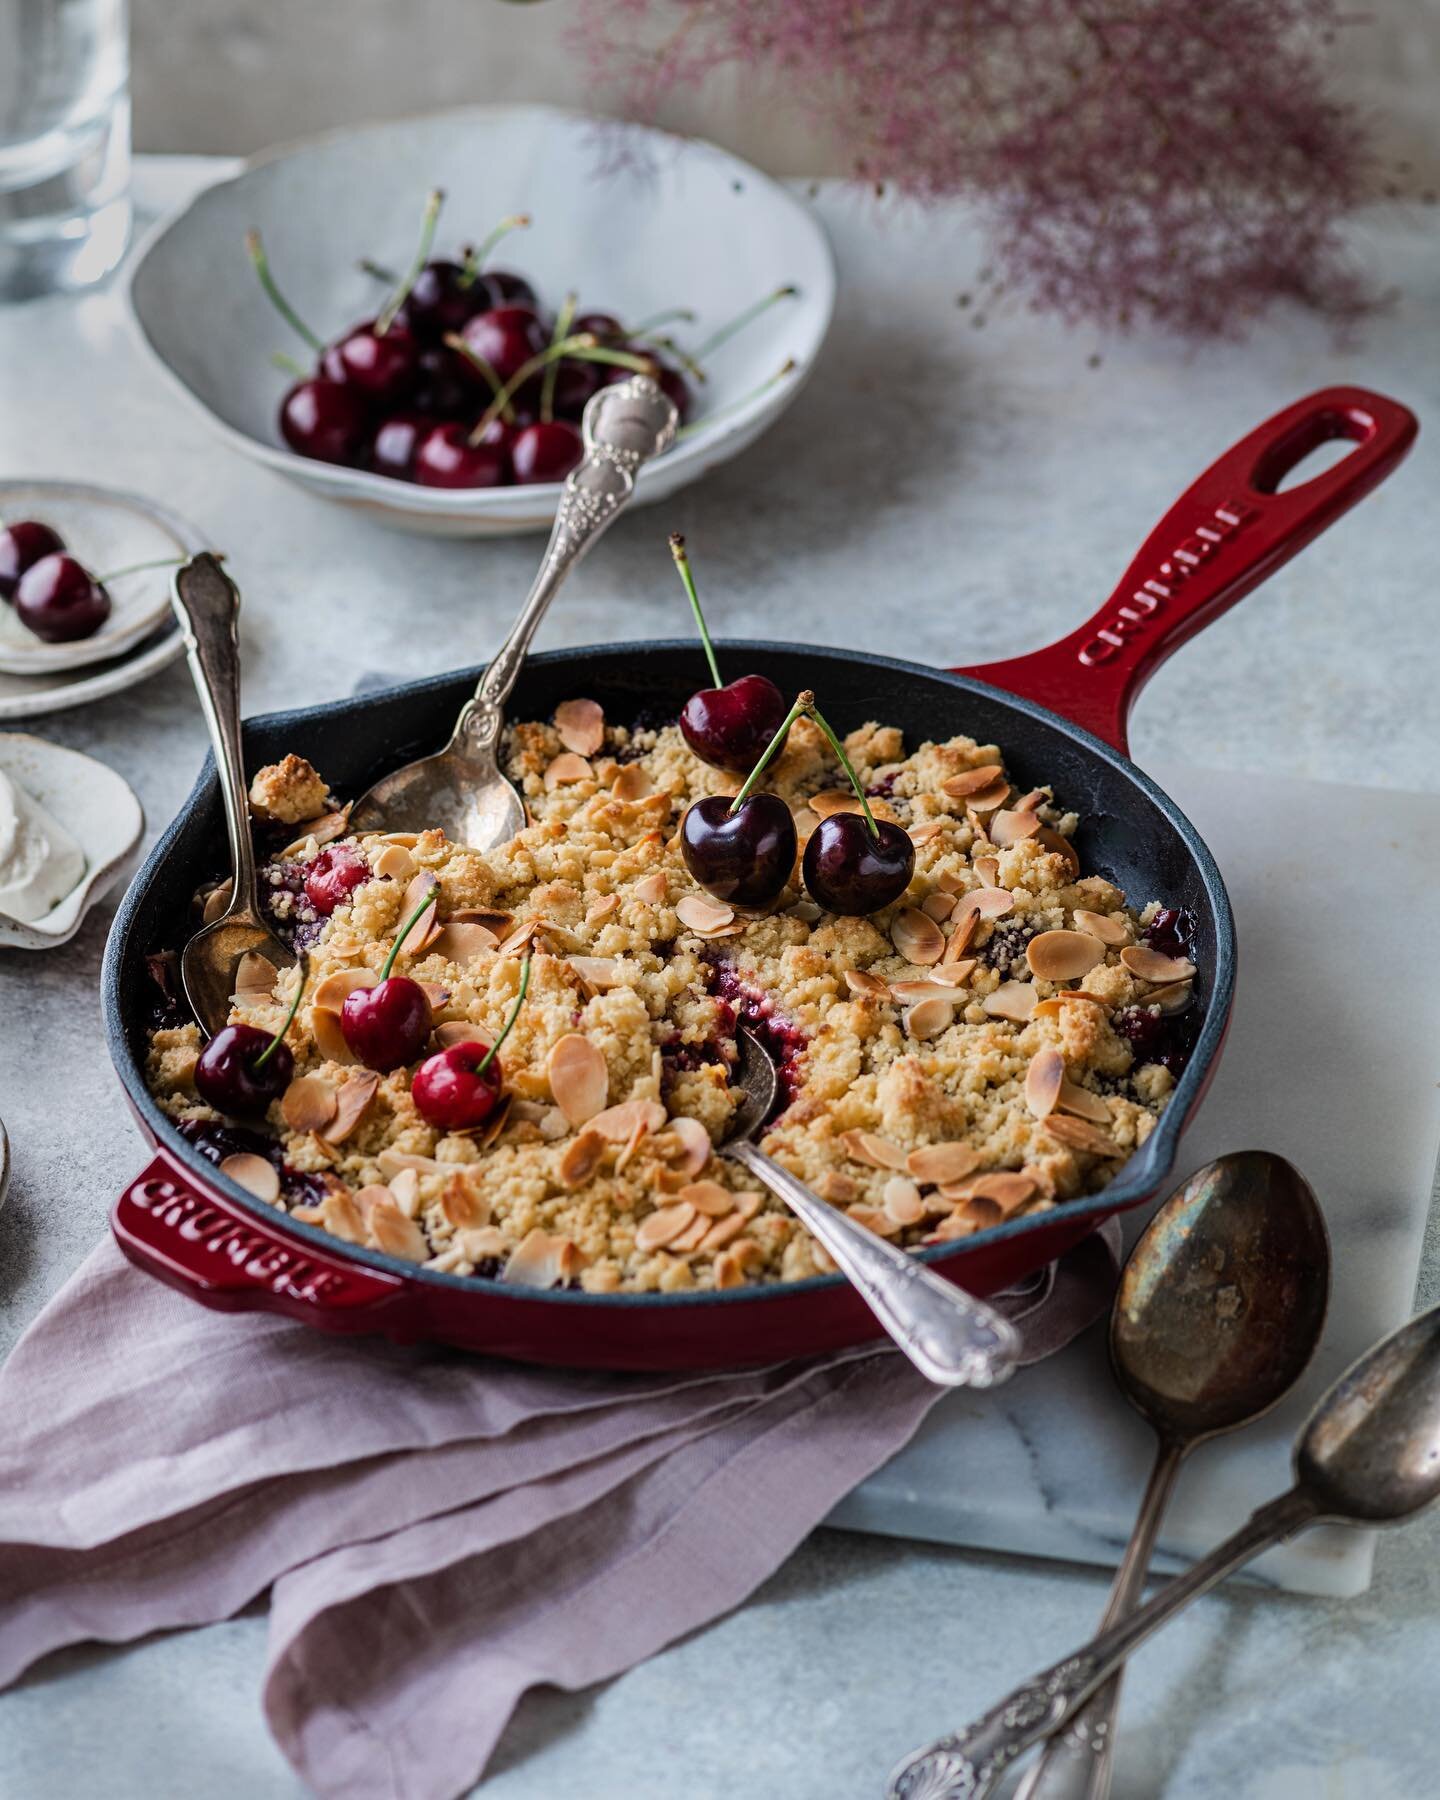 Spiced cherry skillet crumble. 

A perfect Xmas dessert and also a little something I created for some work I&rsquo;ve been doing with @crumble.
Very much oven to table - red wine spiced cherries create some festive mulled wine flavours covered in pl